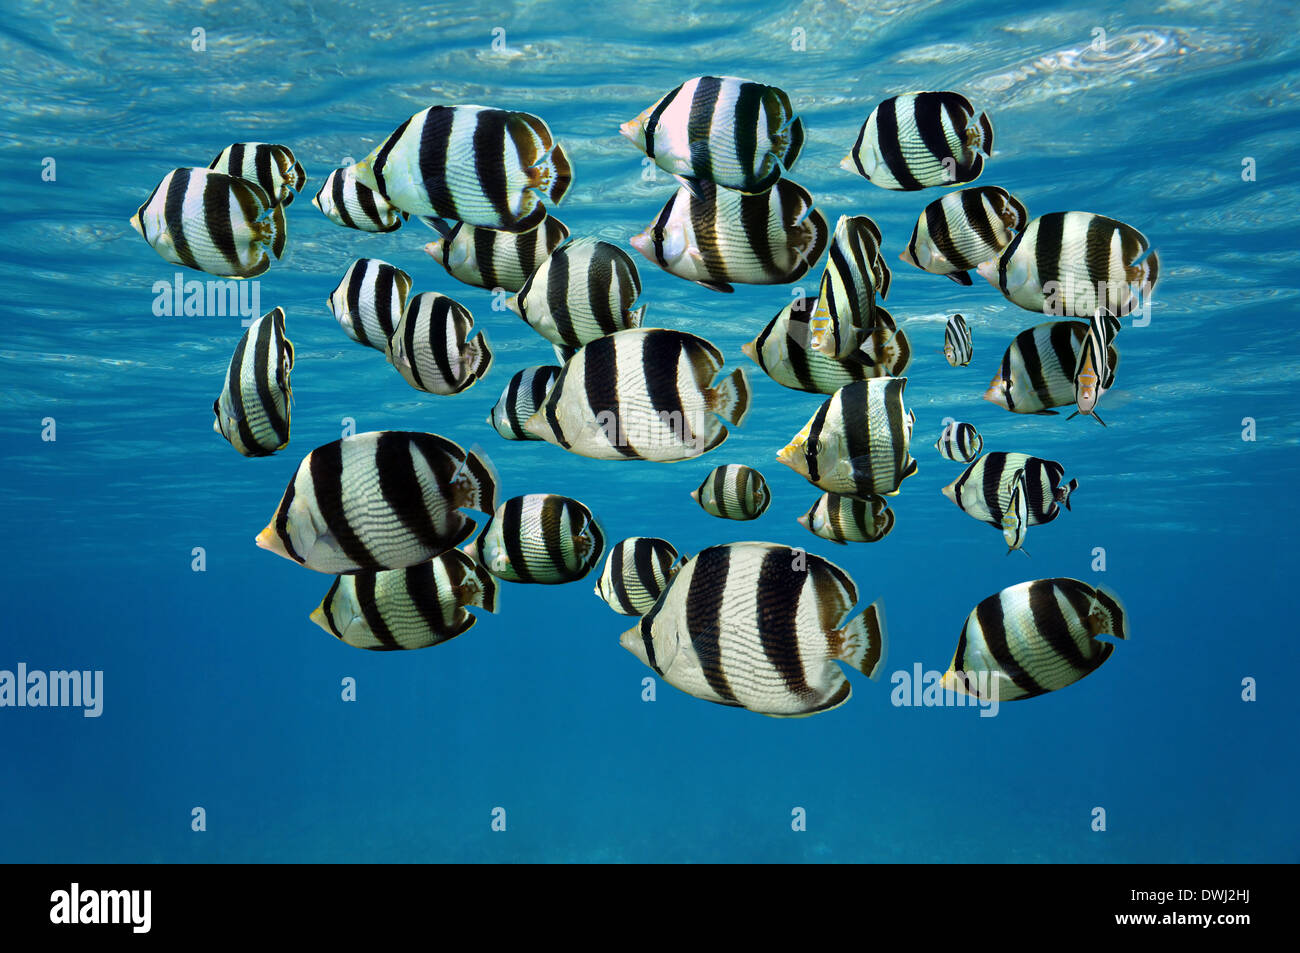 Shoal of tropical fish, Banded butterflyfish, with water surface in background, Caribbean sea Stock Photo